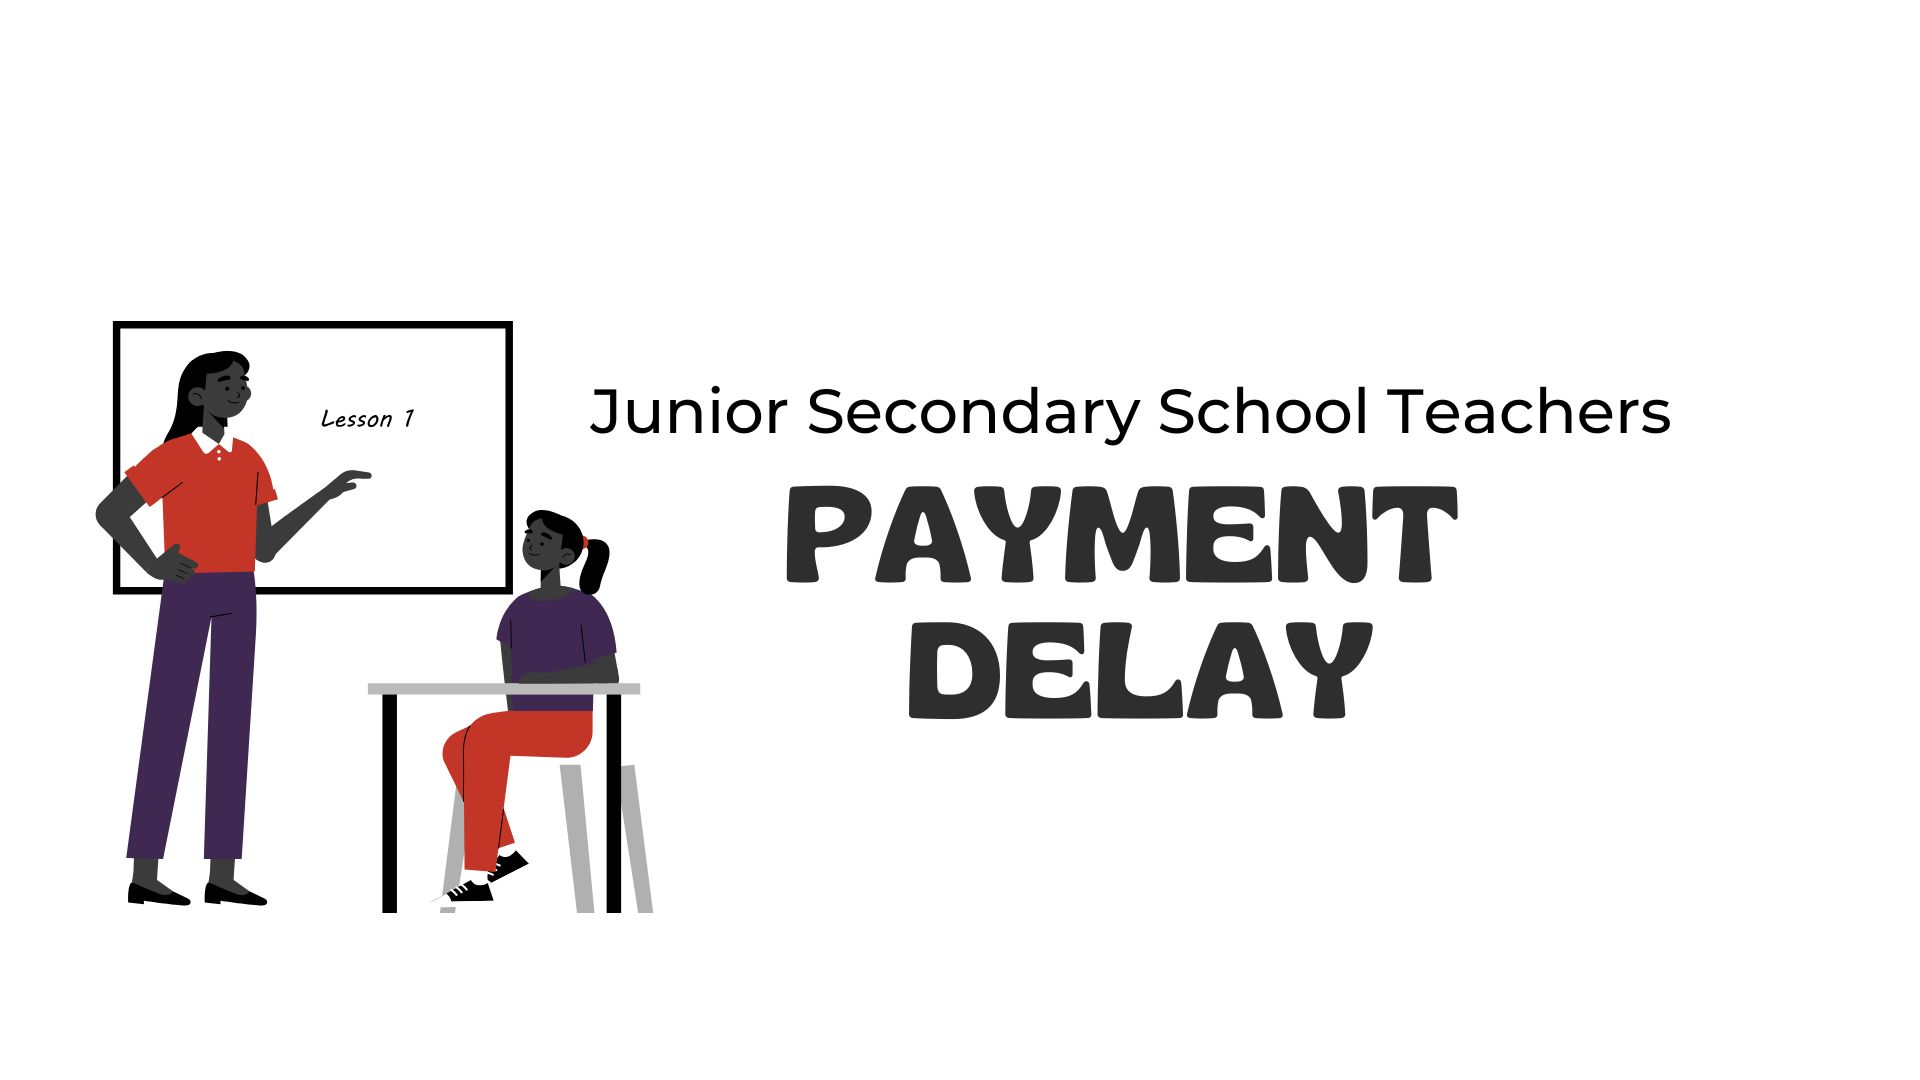 Junior Secondary School payment delayed for four months